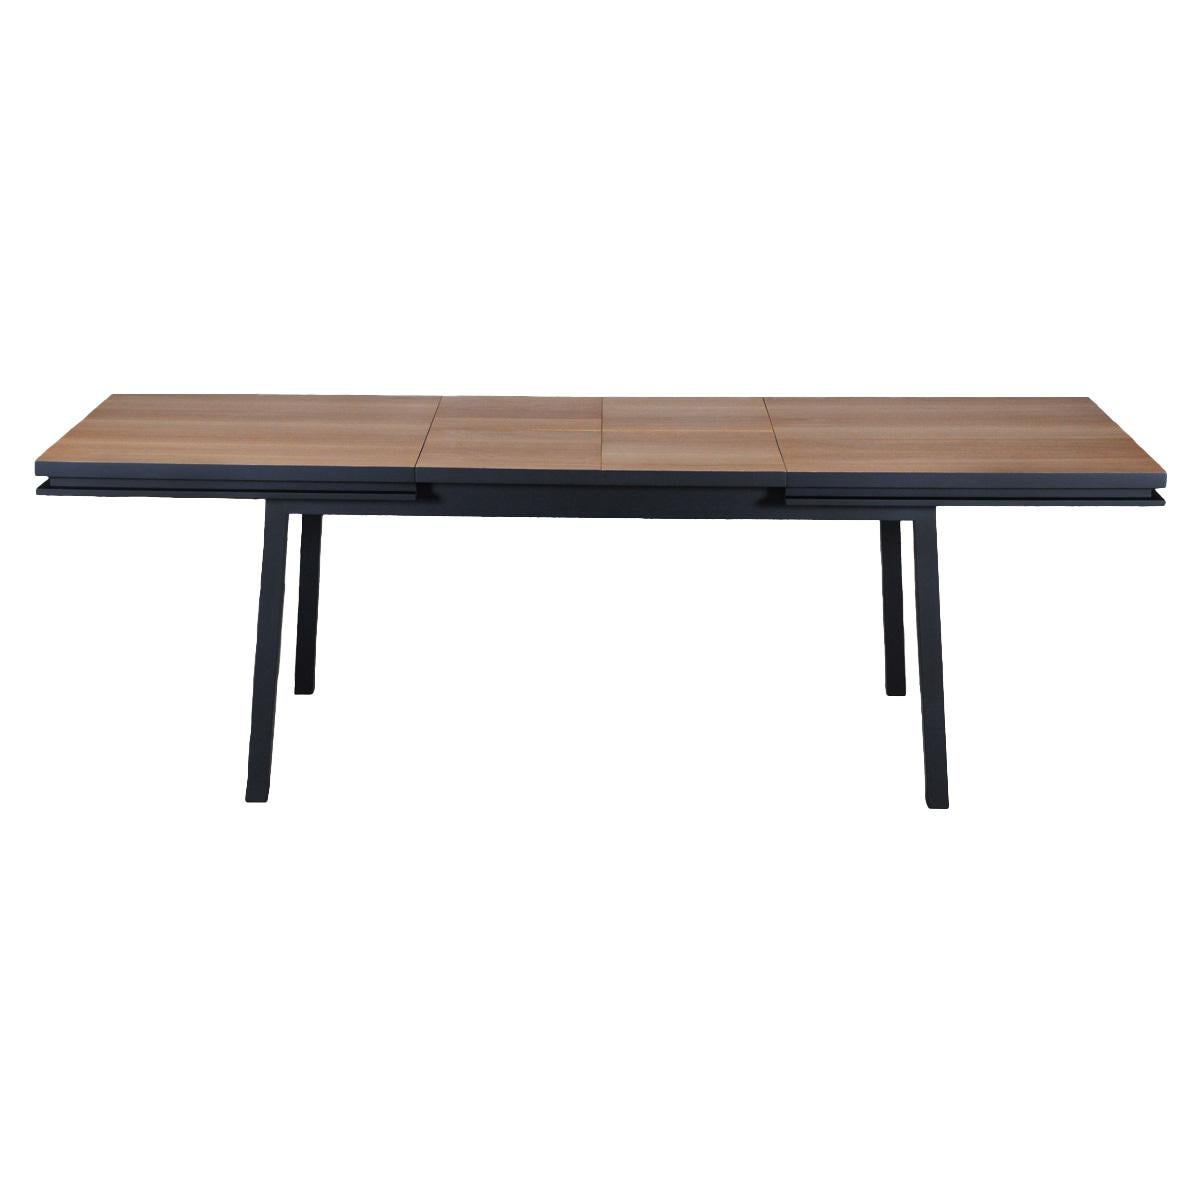 This rectangular extensible table belongs to the EGEE collection by the famous parisian Designer Eric Gizard, Paris. It is made 100% of  solid oak wood  in a scandinavian sleek design. 

2 leaves - extensions of 40 cm / 15.7'' each are folded under